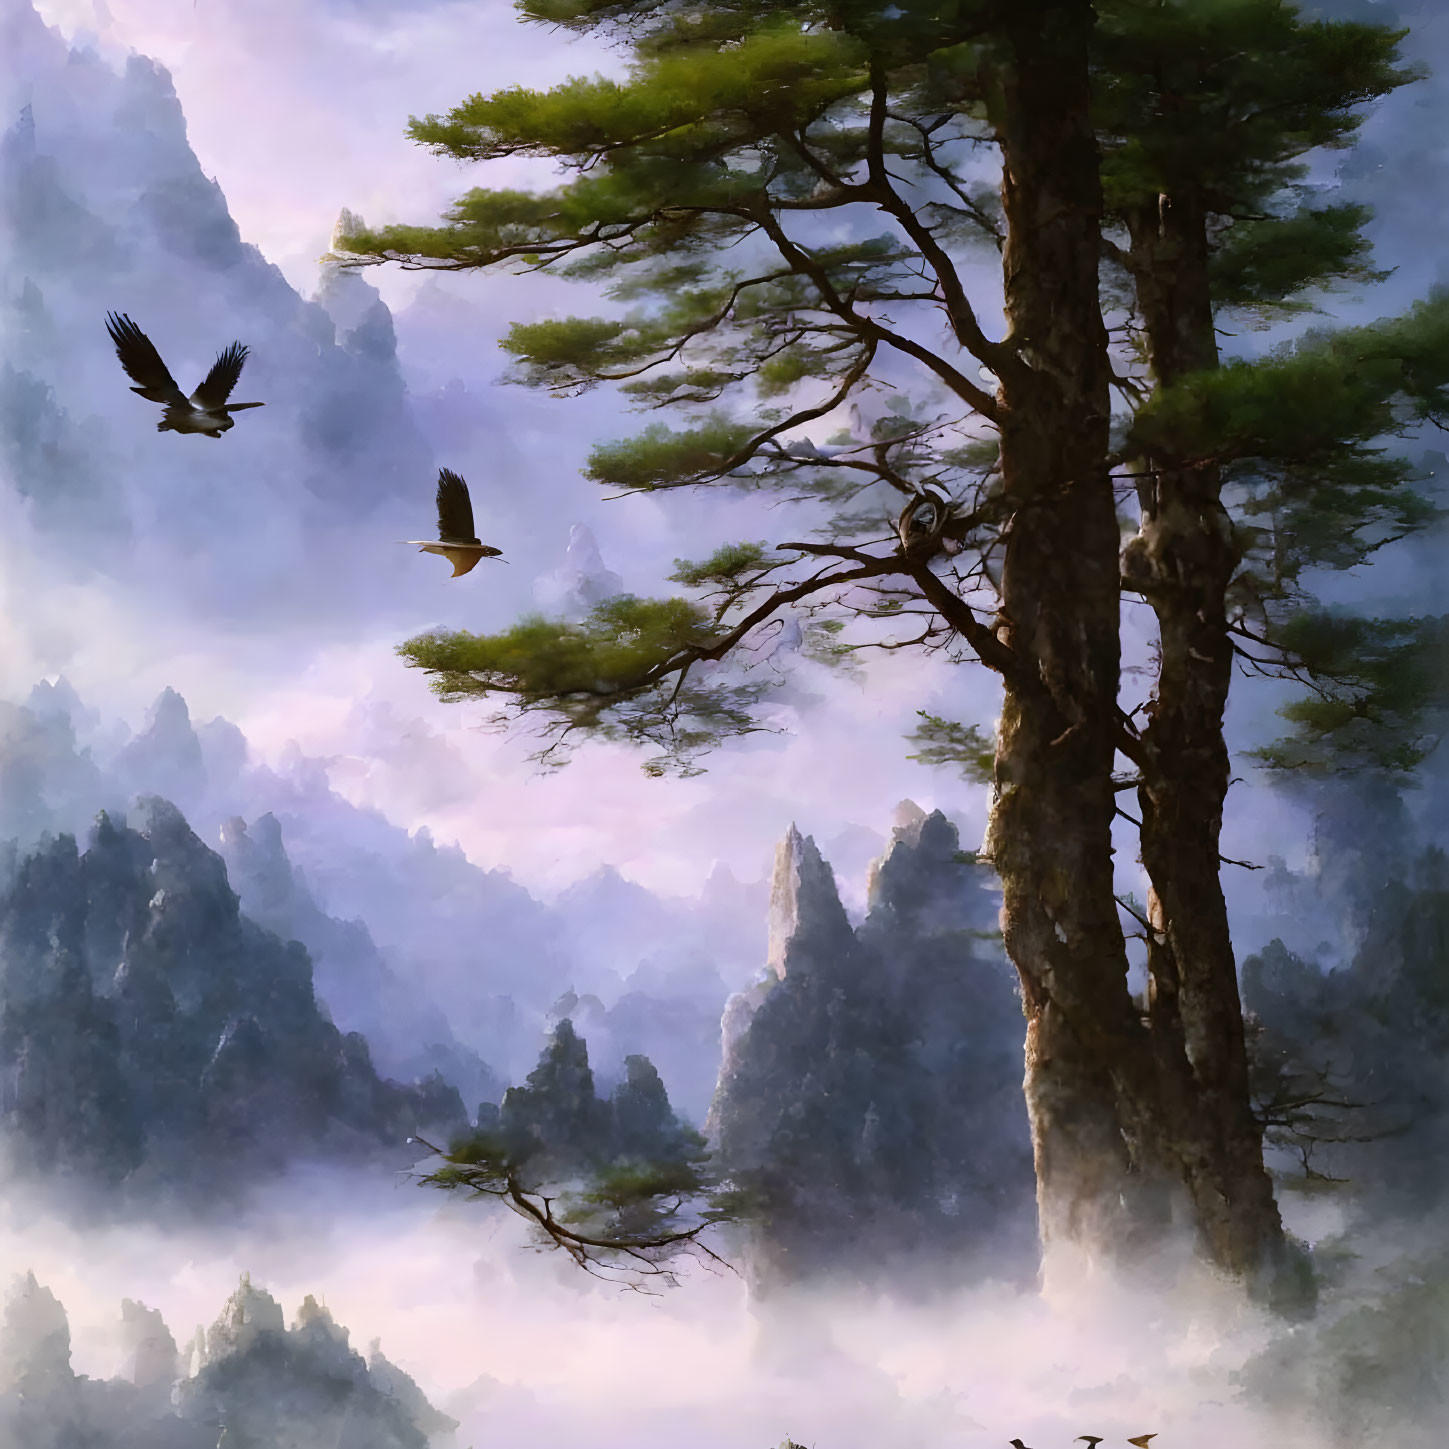 Mystical forest landscape with towering trees and birds in flight among misty mountains